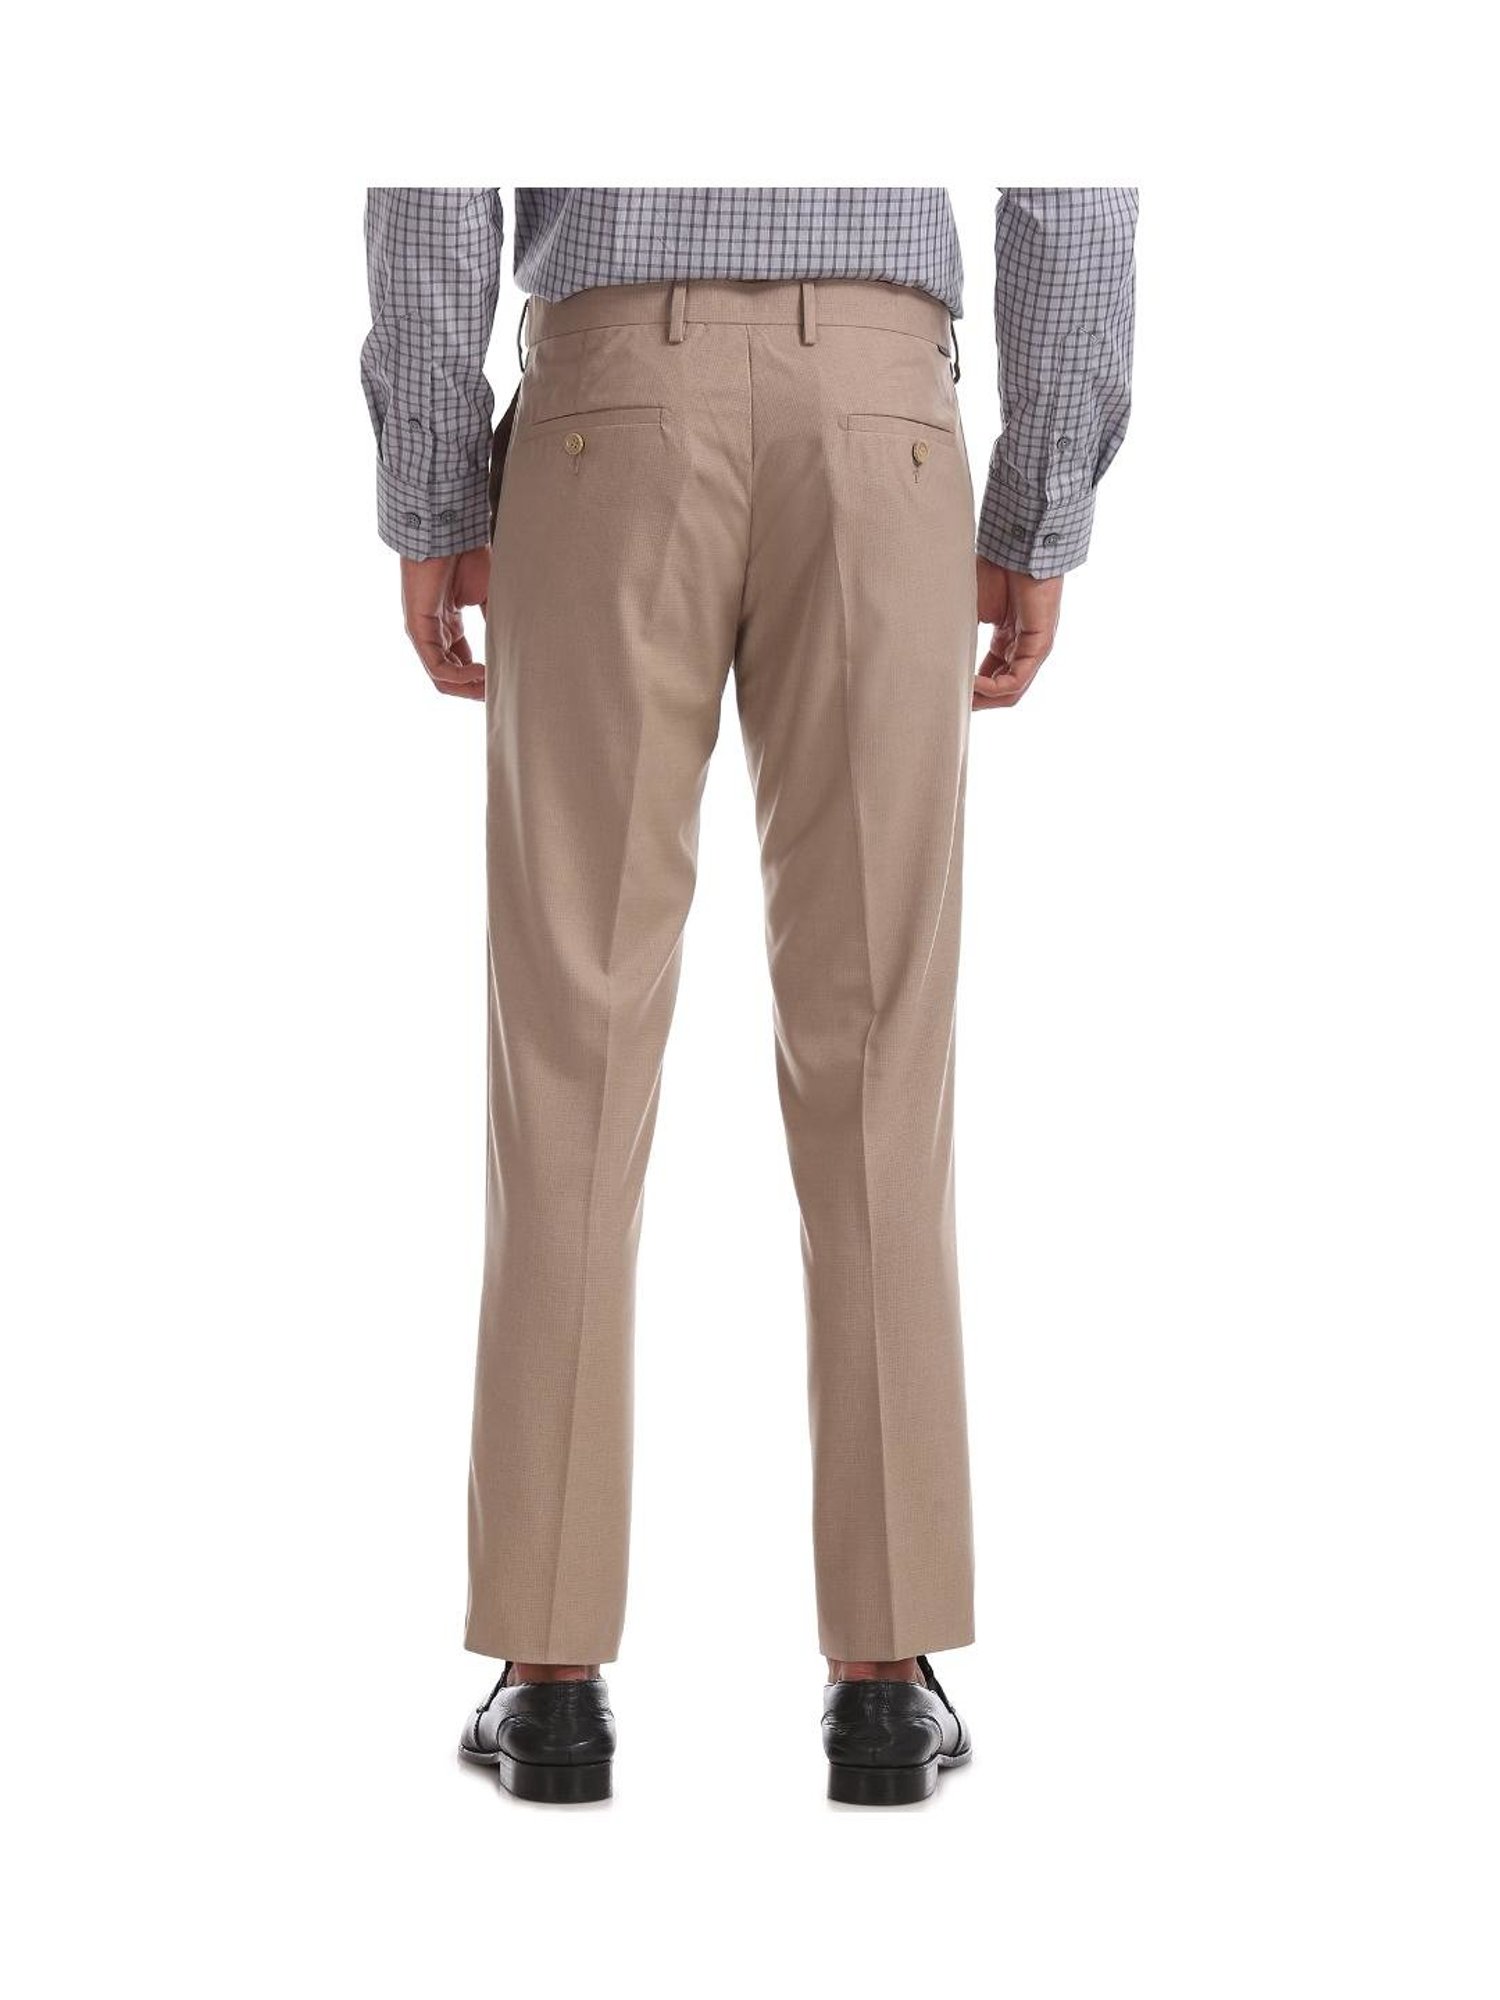 US Polo Assn Formal Trousers  Buy US Polo Assn Men Light Blue Flat  Front Solid Formal Trousers Online  Nykaa Fashion